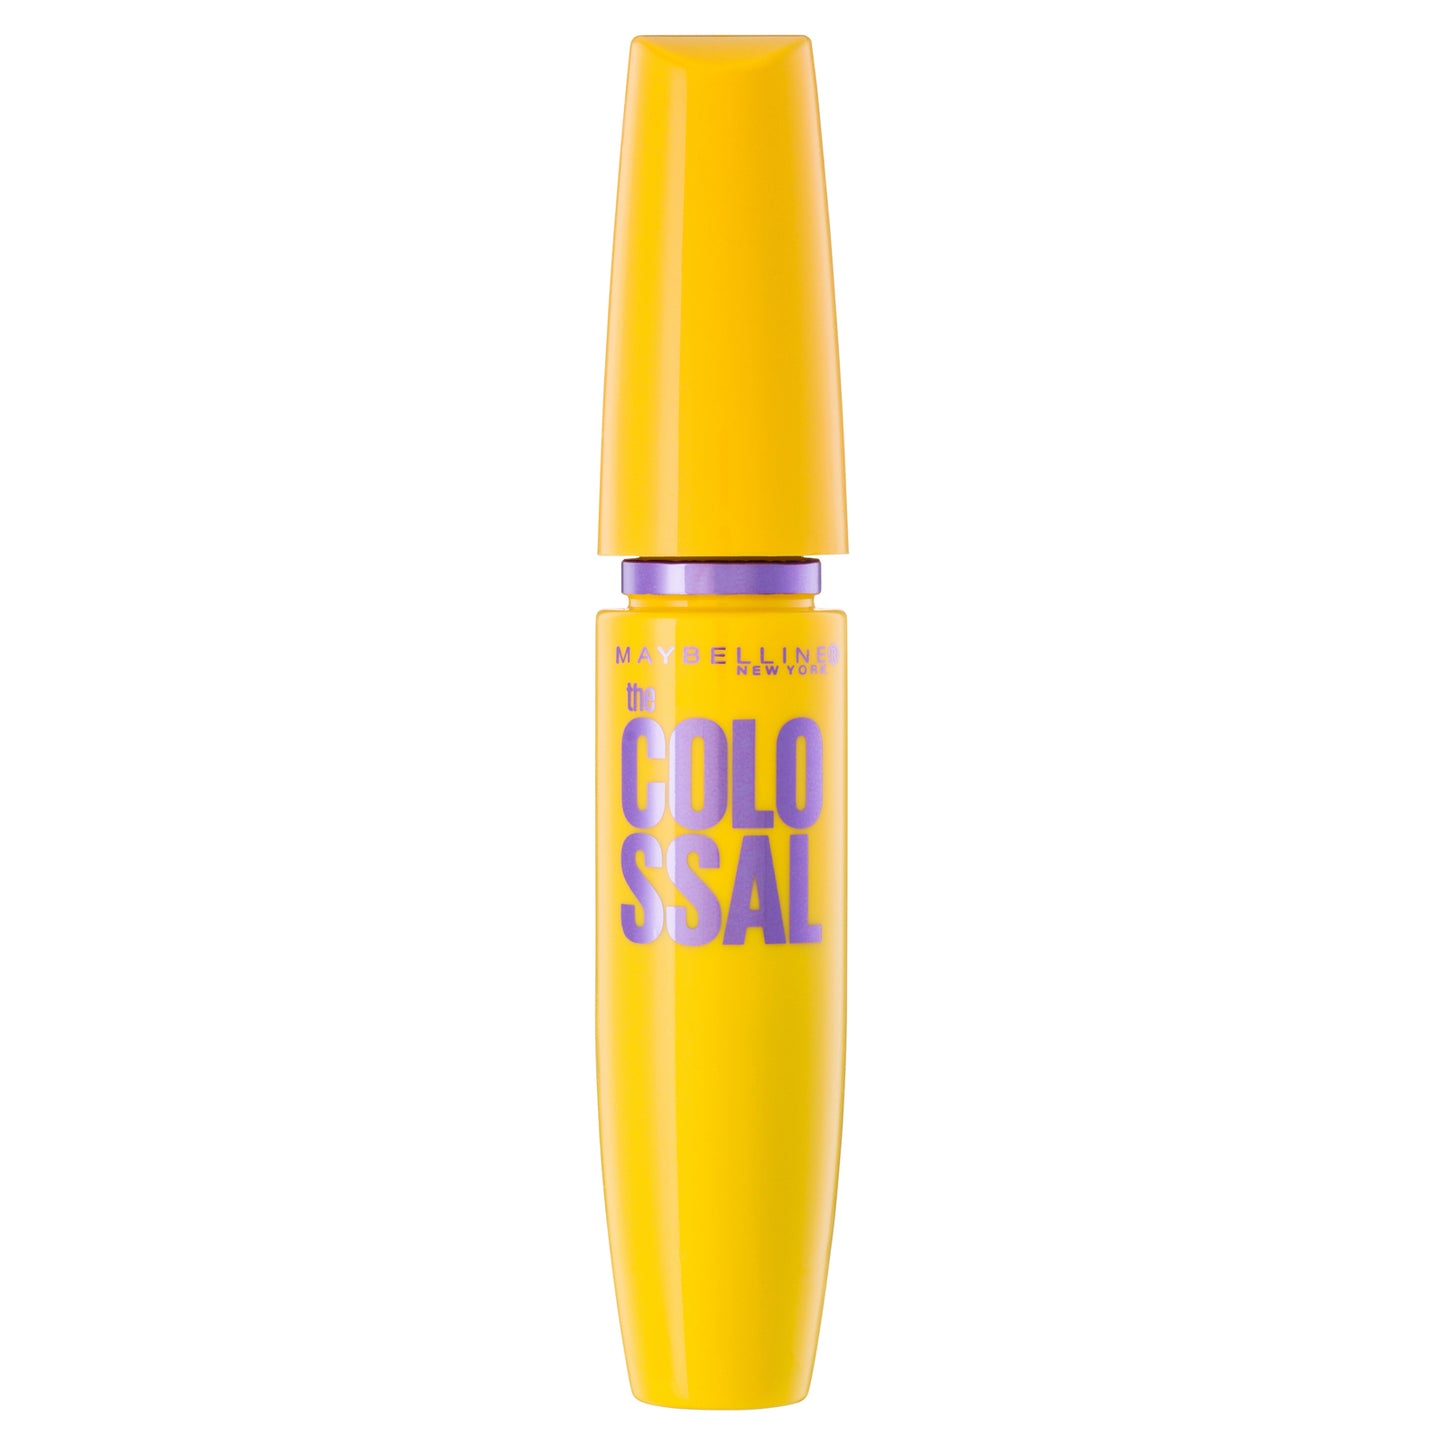 Maybelline The Colossal Volume Express Mascara 9.2mL - 230 Glam Black